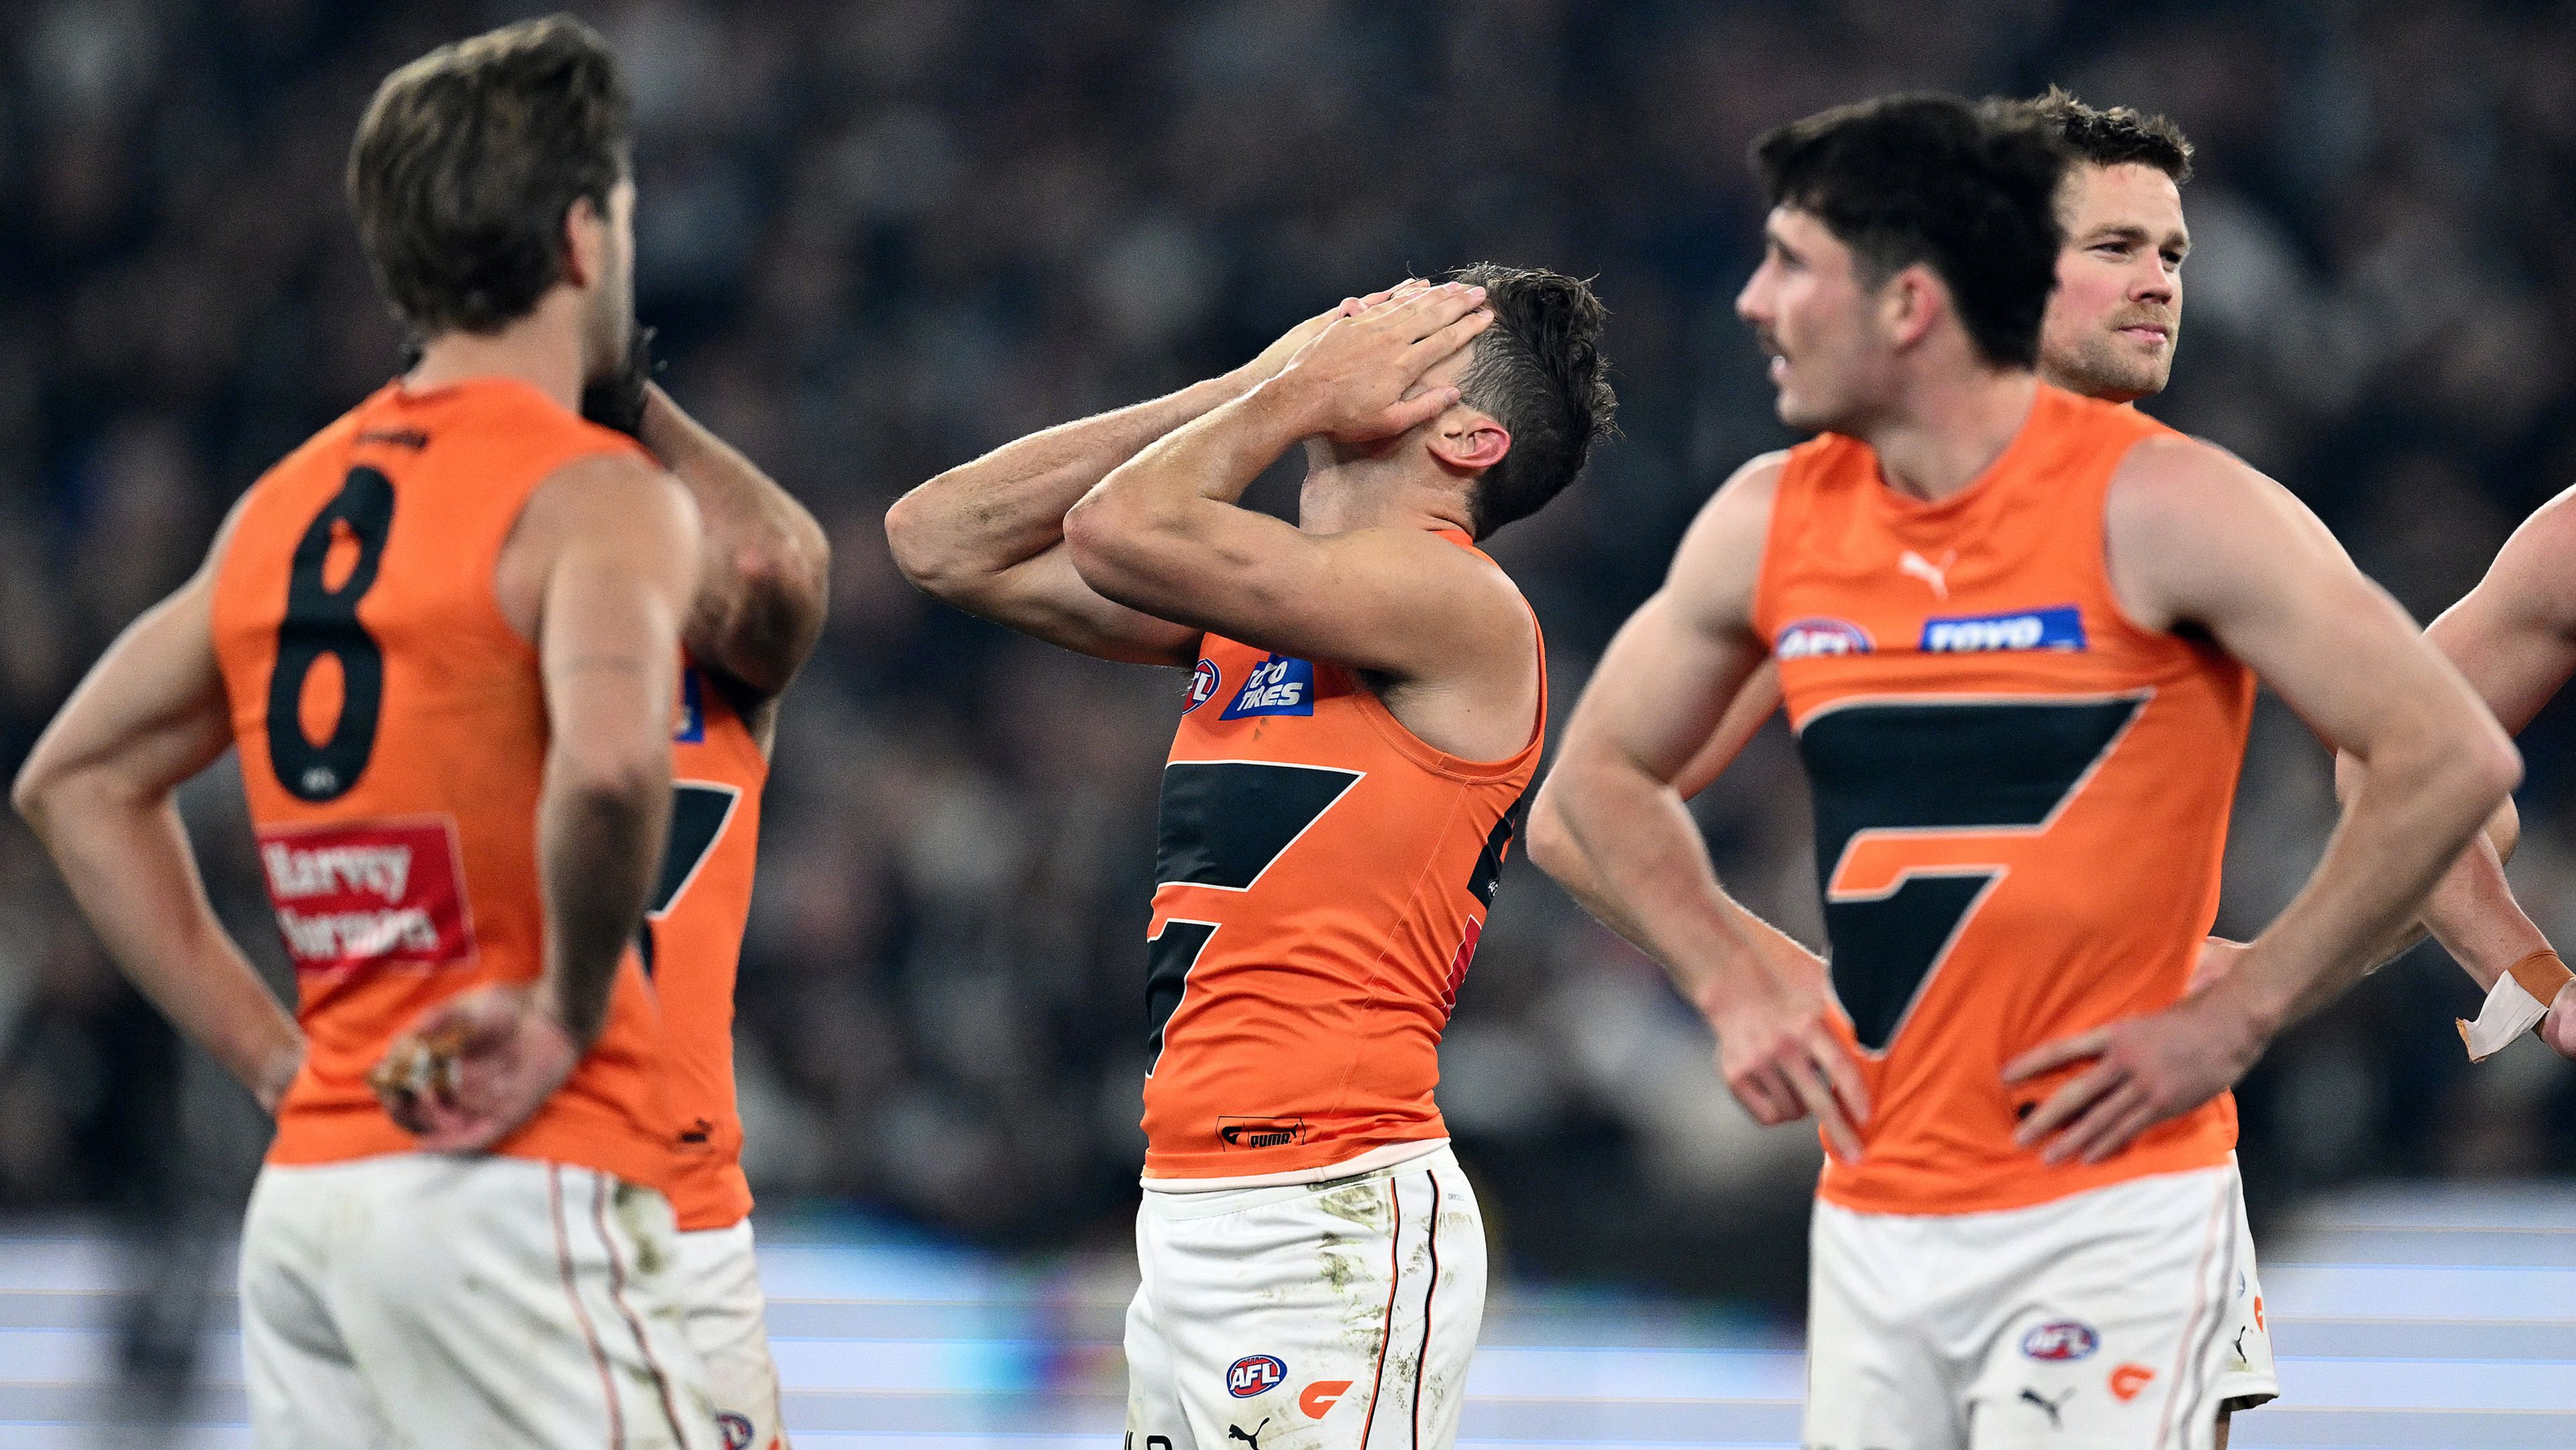 The Giants look dejected after losing their preliminary final loss to the Magpies.